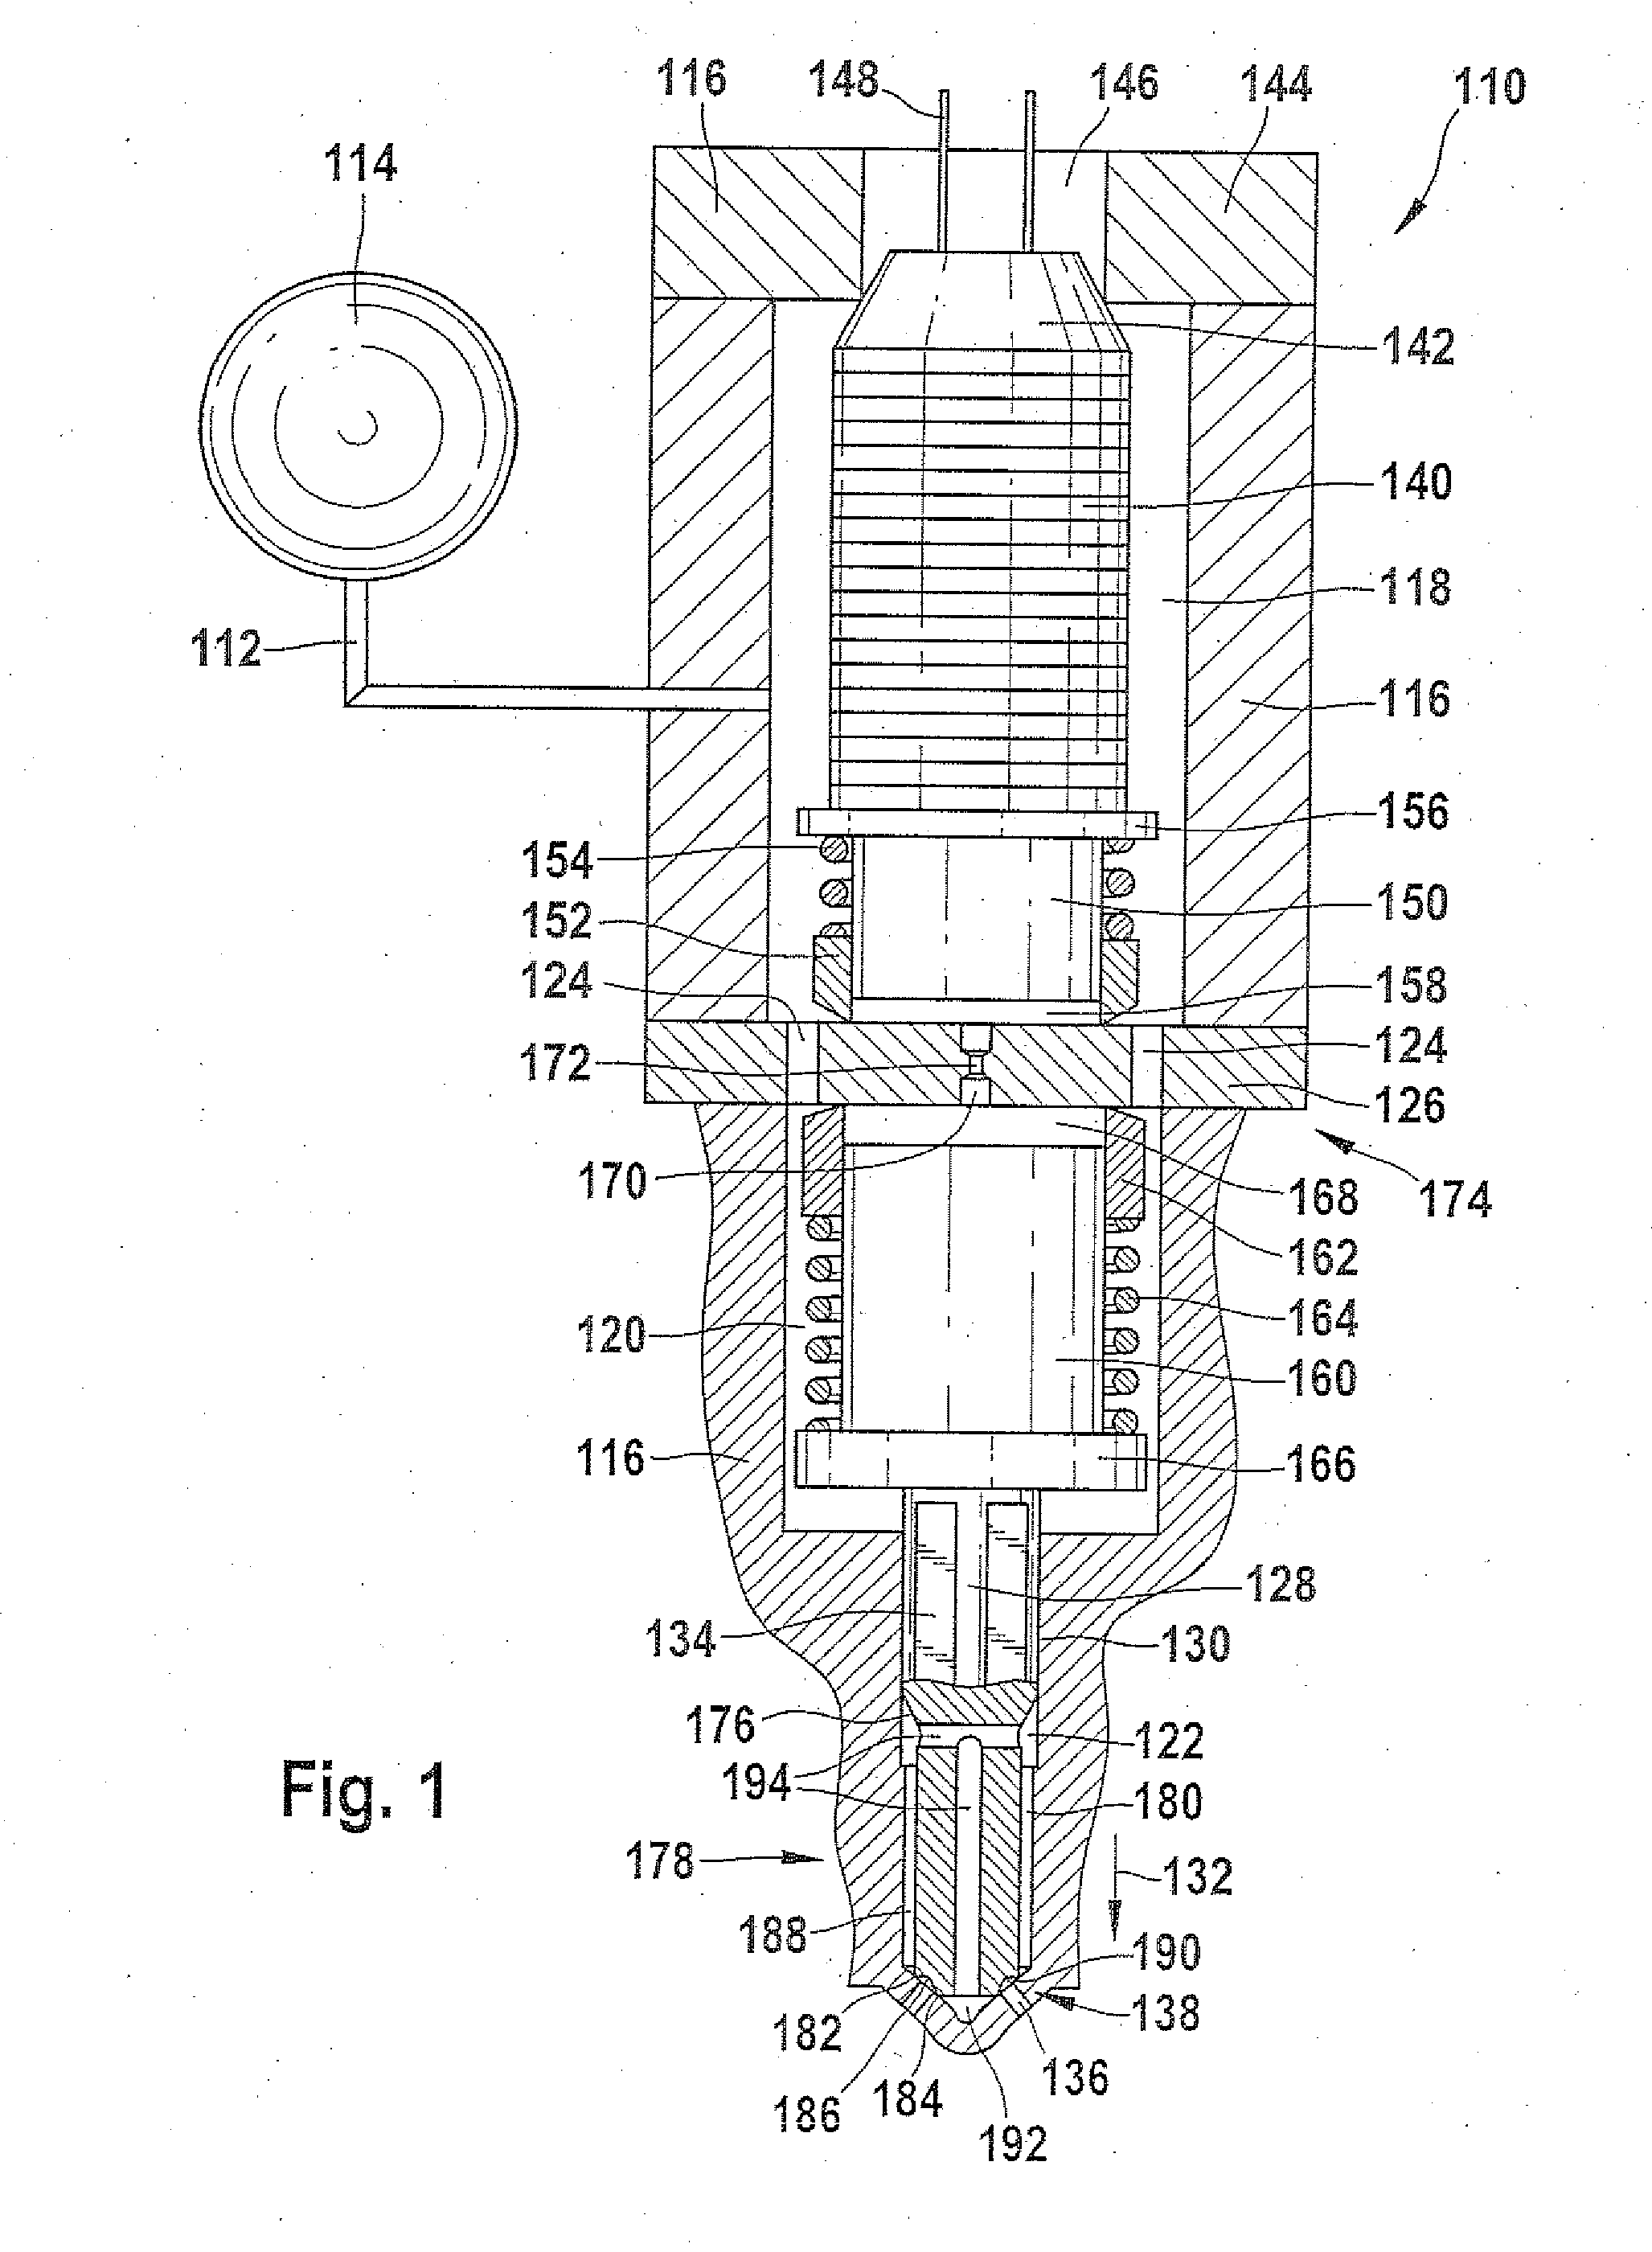 Fuel Injector with Direct-Controlled Injection Valve Member with Double Seat